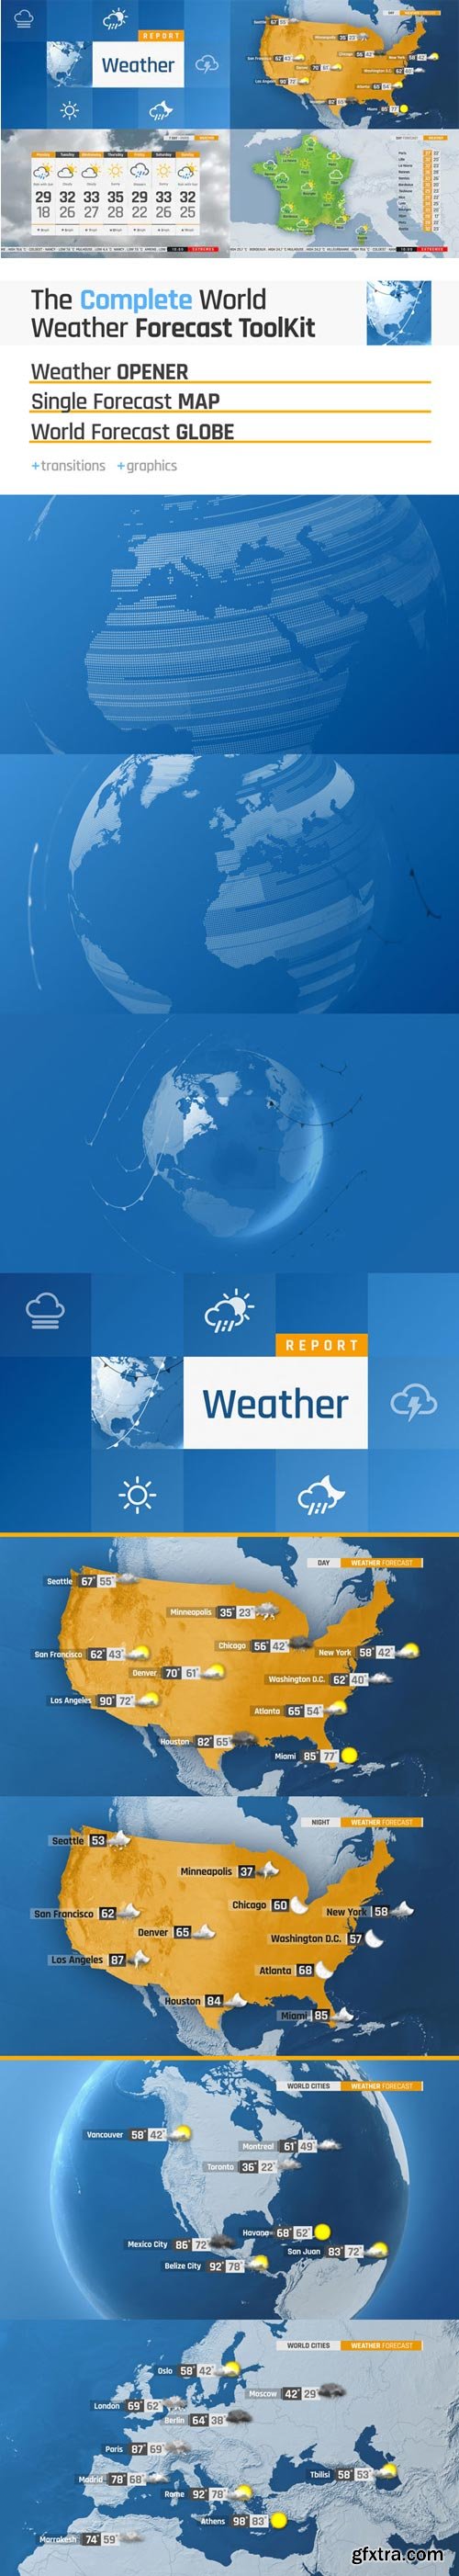 Videohive - The Complete World Weather Forecast ToolKit - 26764828